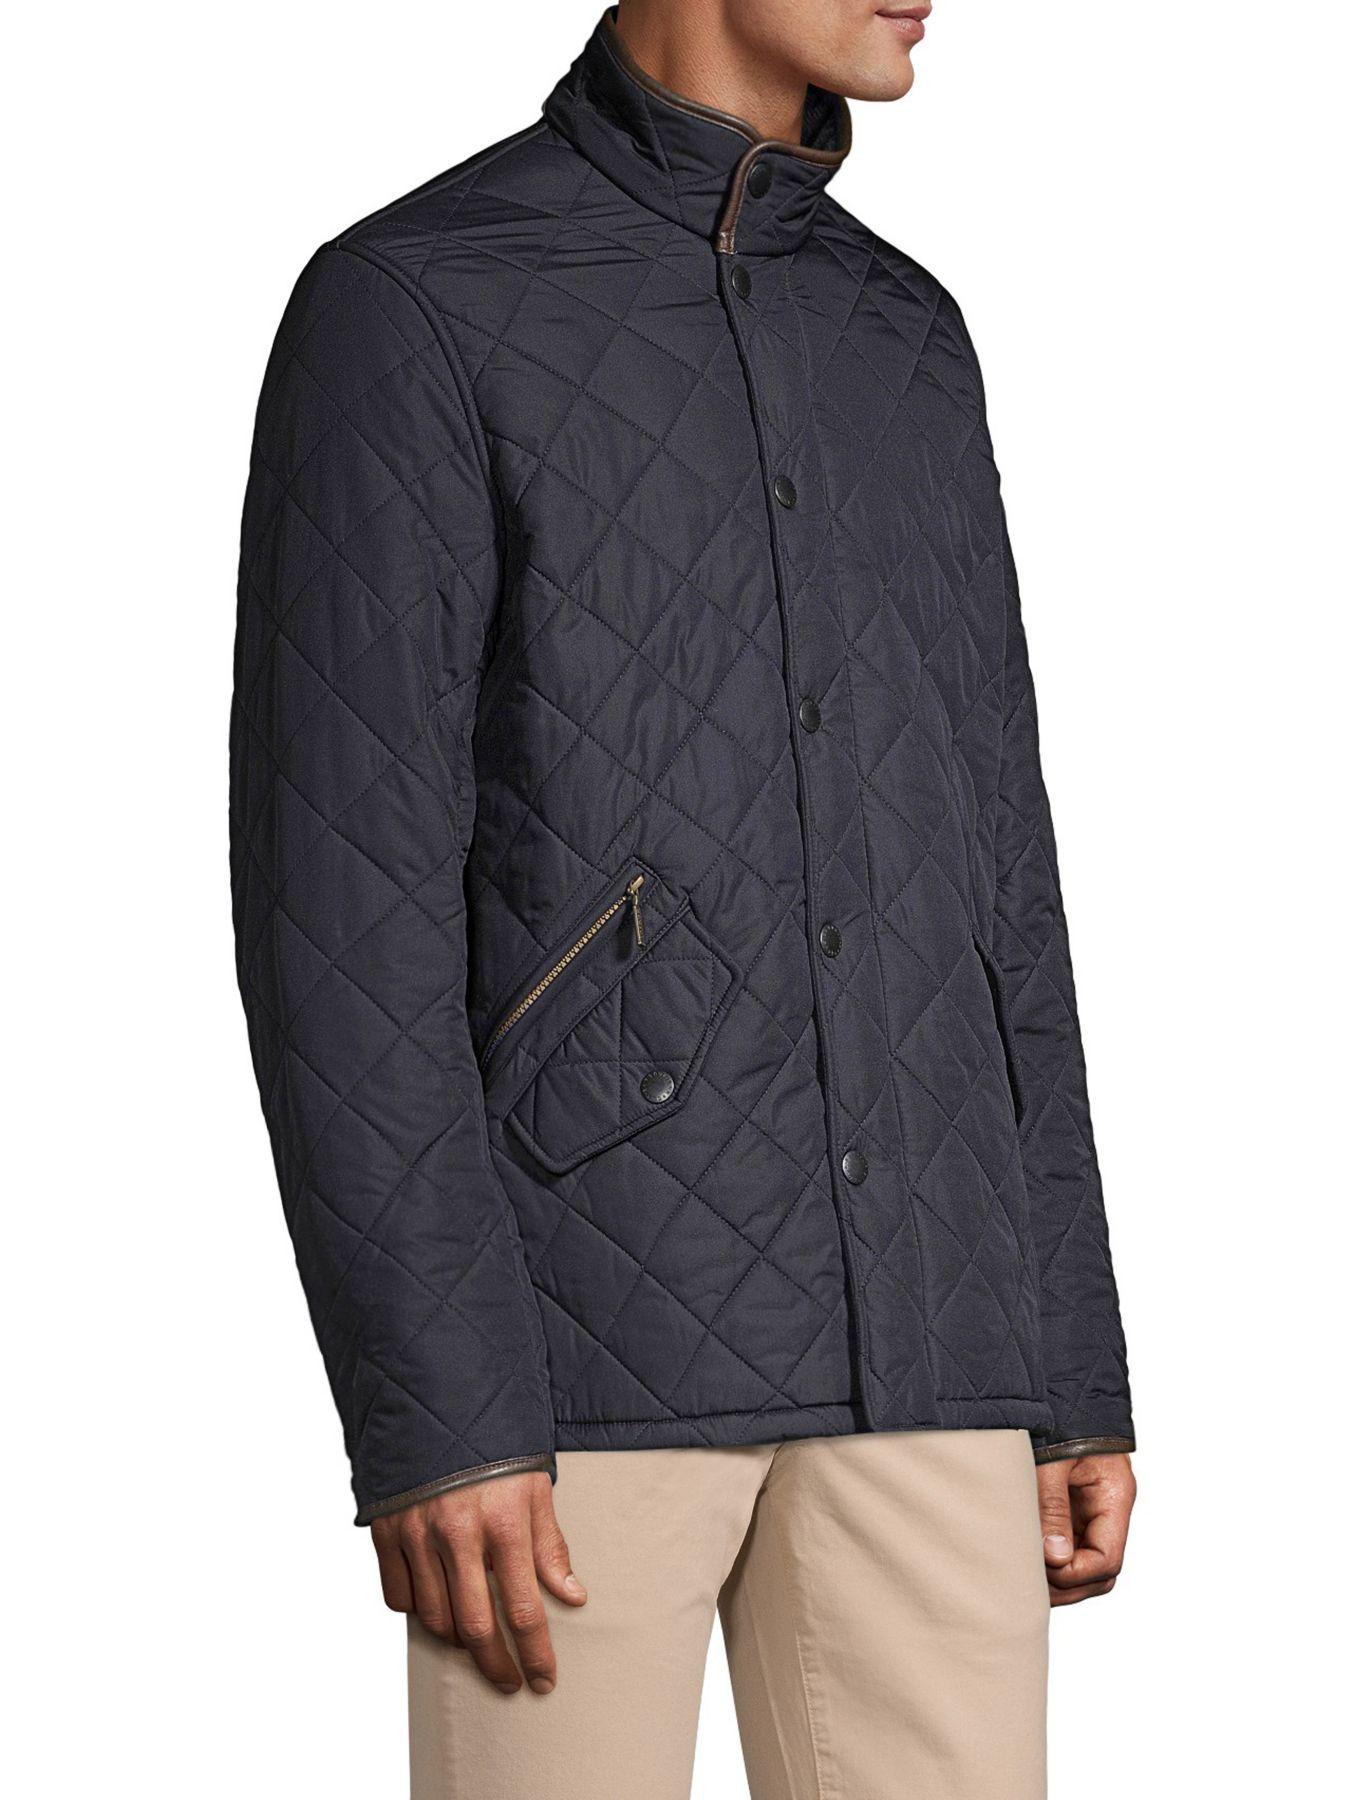 Barbour Synthetic Powell Quilted Jacket in Navy (Blue) for Men - Lyst